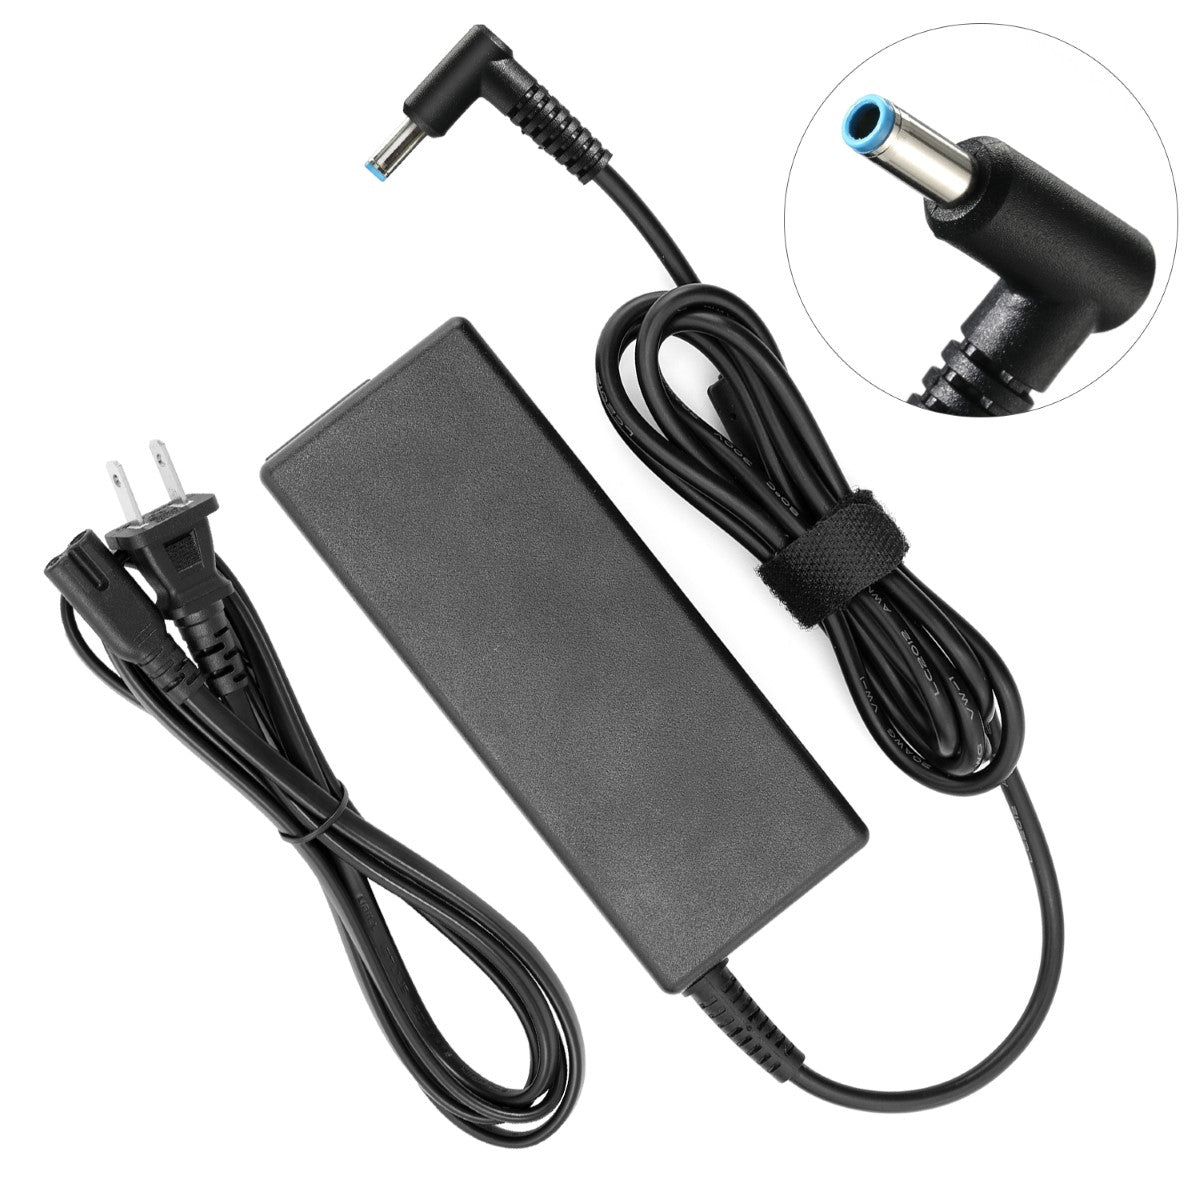 AC Adapter Charger for hp Envy Touchsmart 15-k002 Notebook.